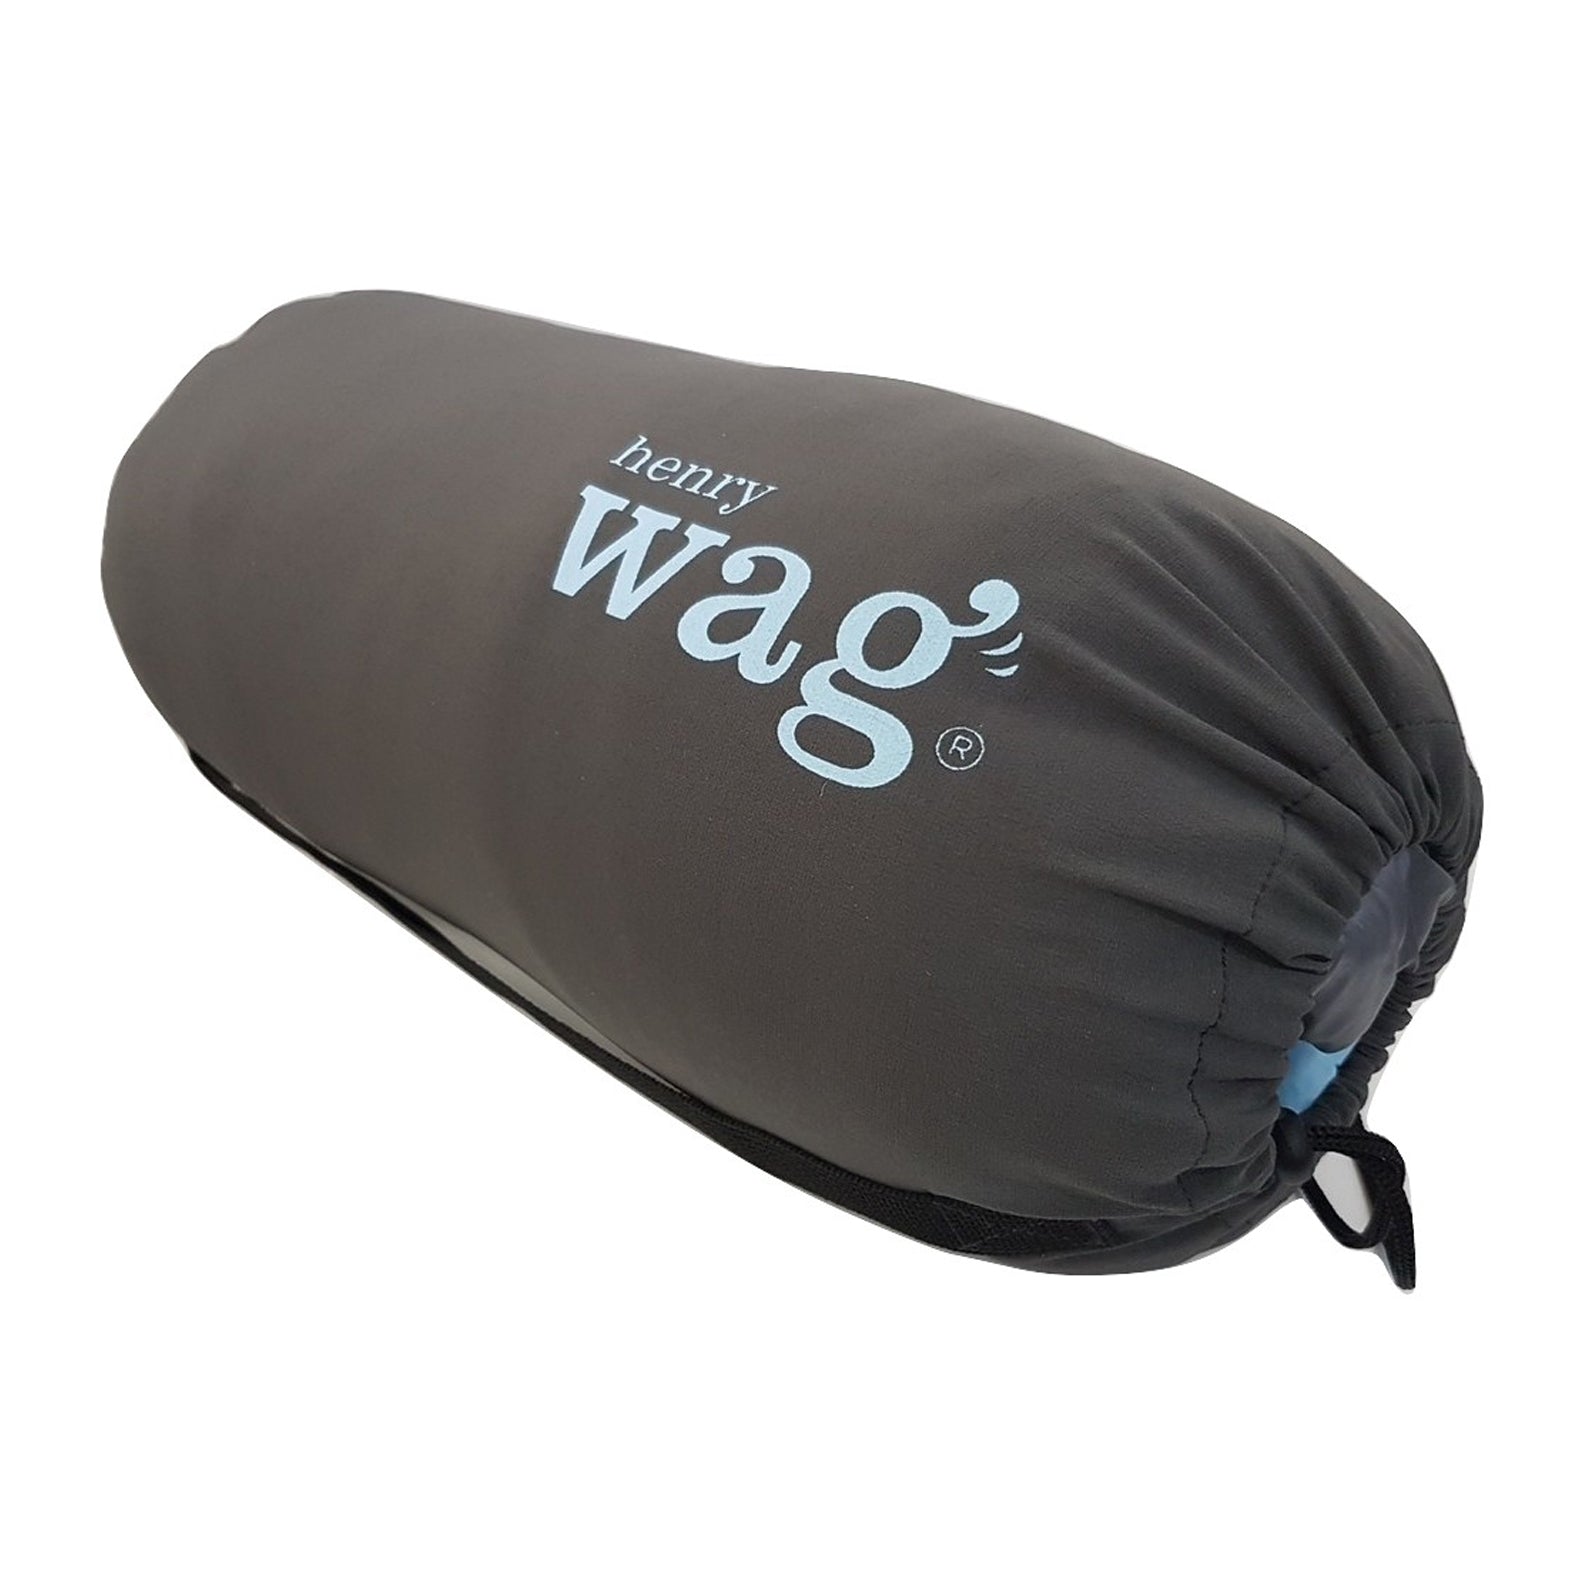 Henry-Wag-Alpine-Travel-Snuggle-Bed